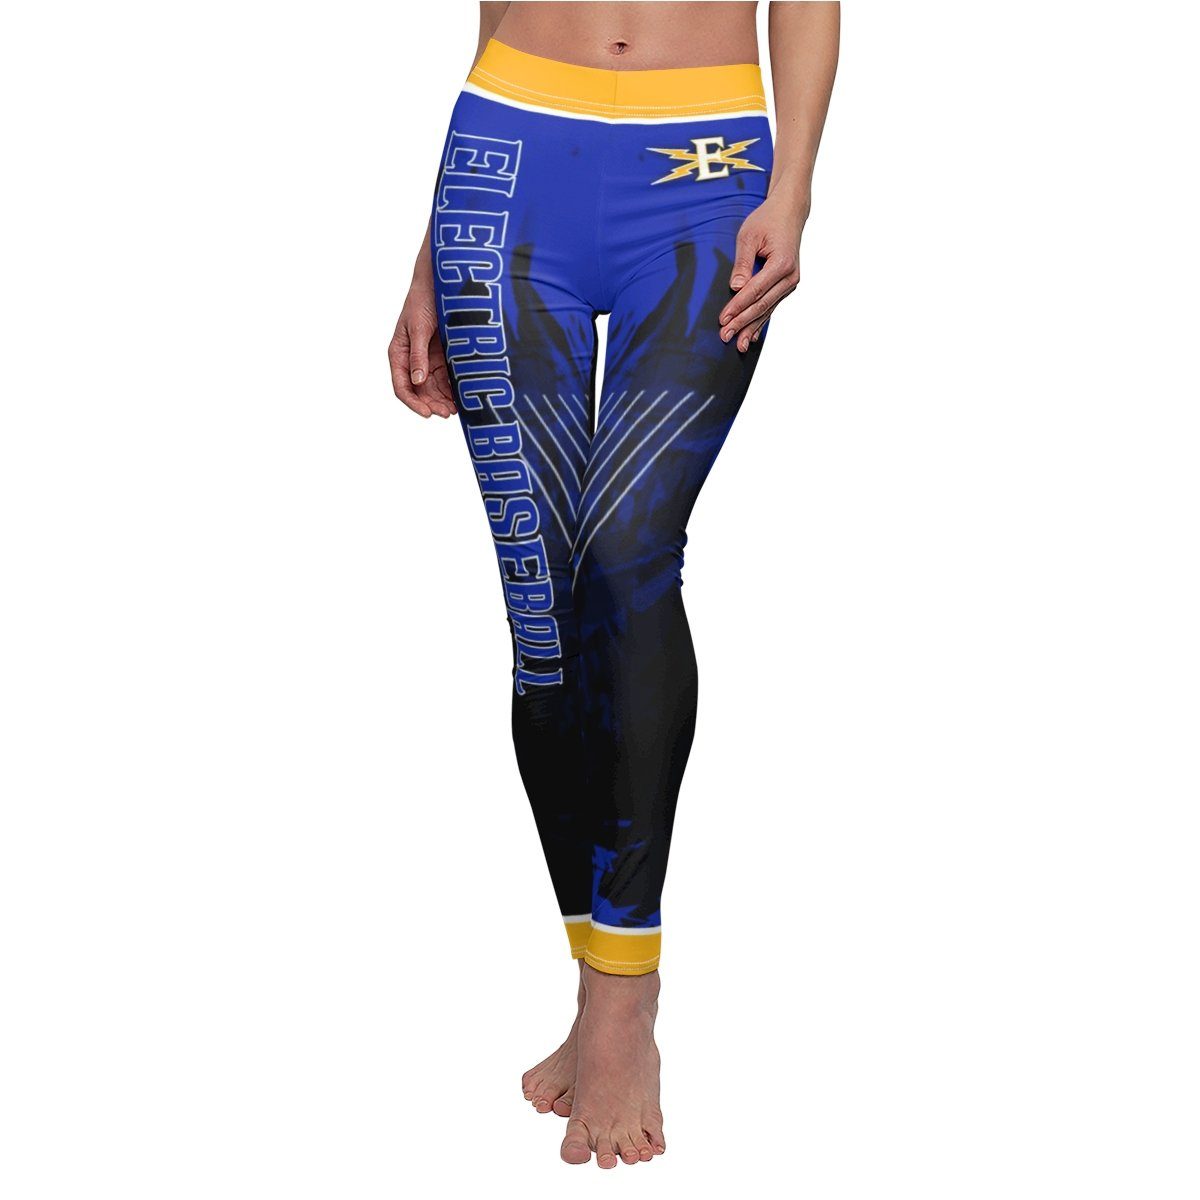 Breaker - V.1 - Extreme Sportswear Cut & Sew Leggings Template-Photoshop Template - Photo Solutions